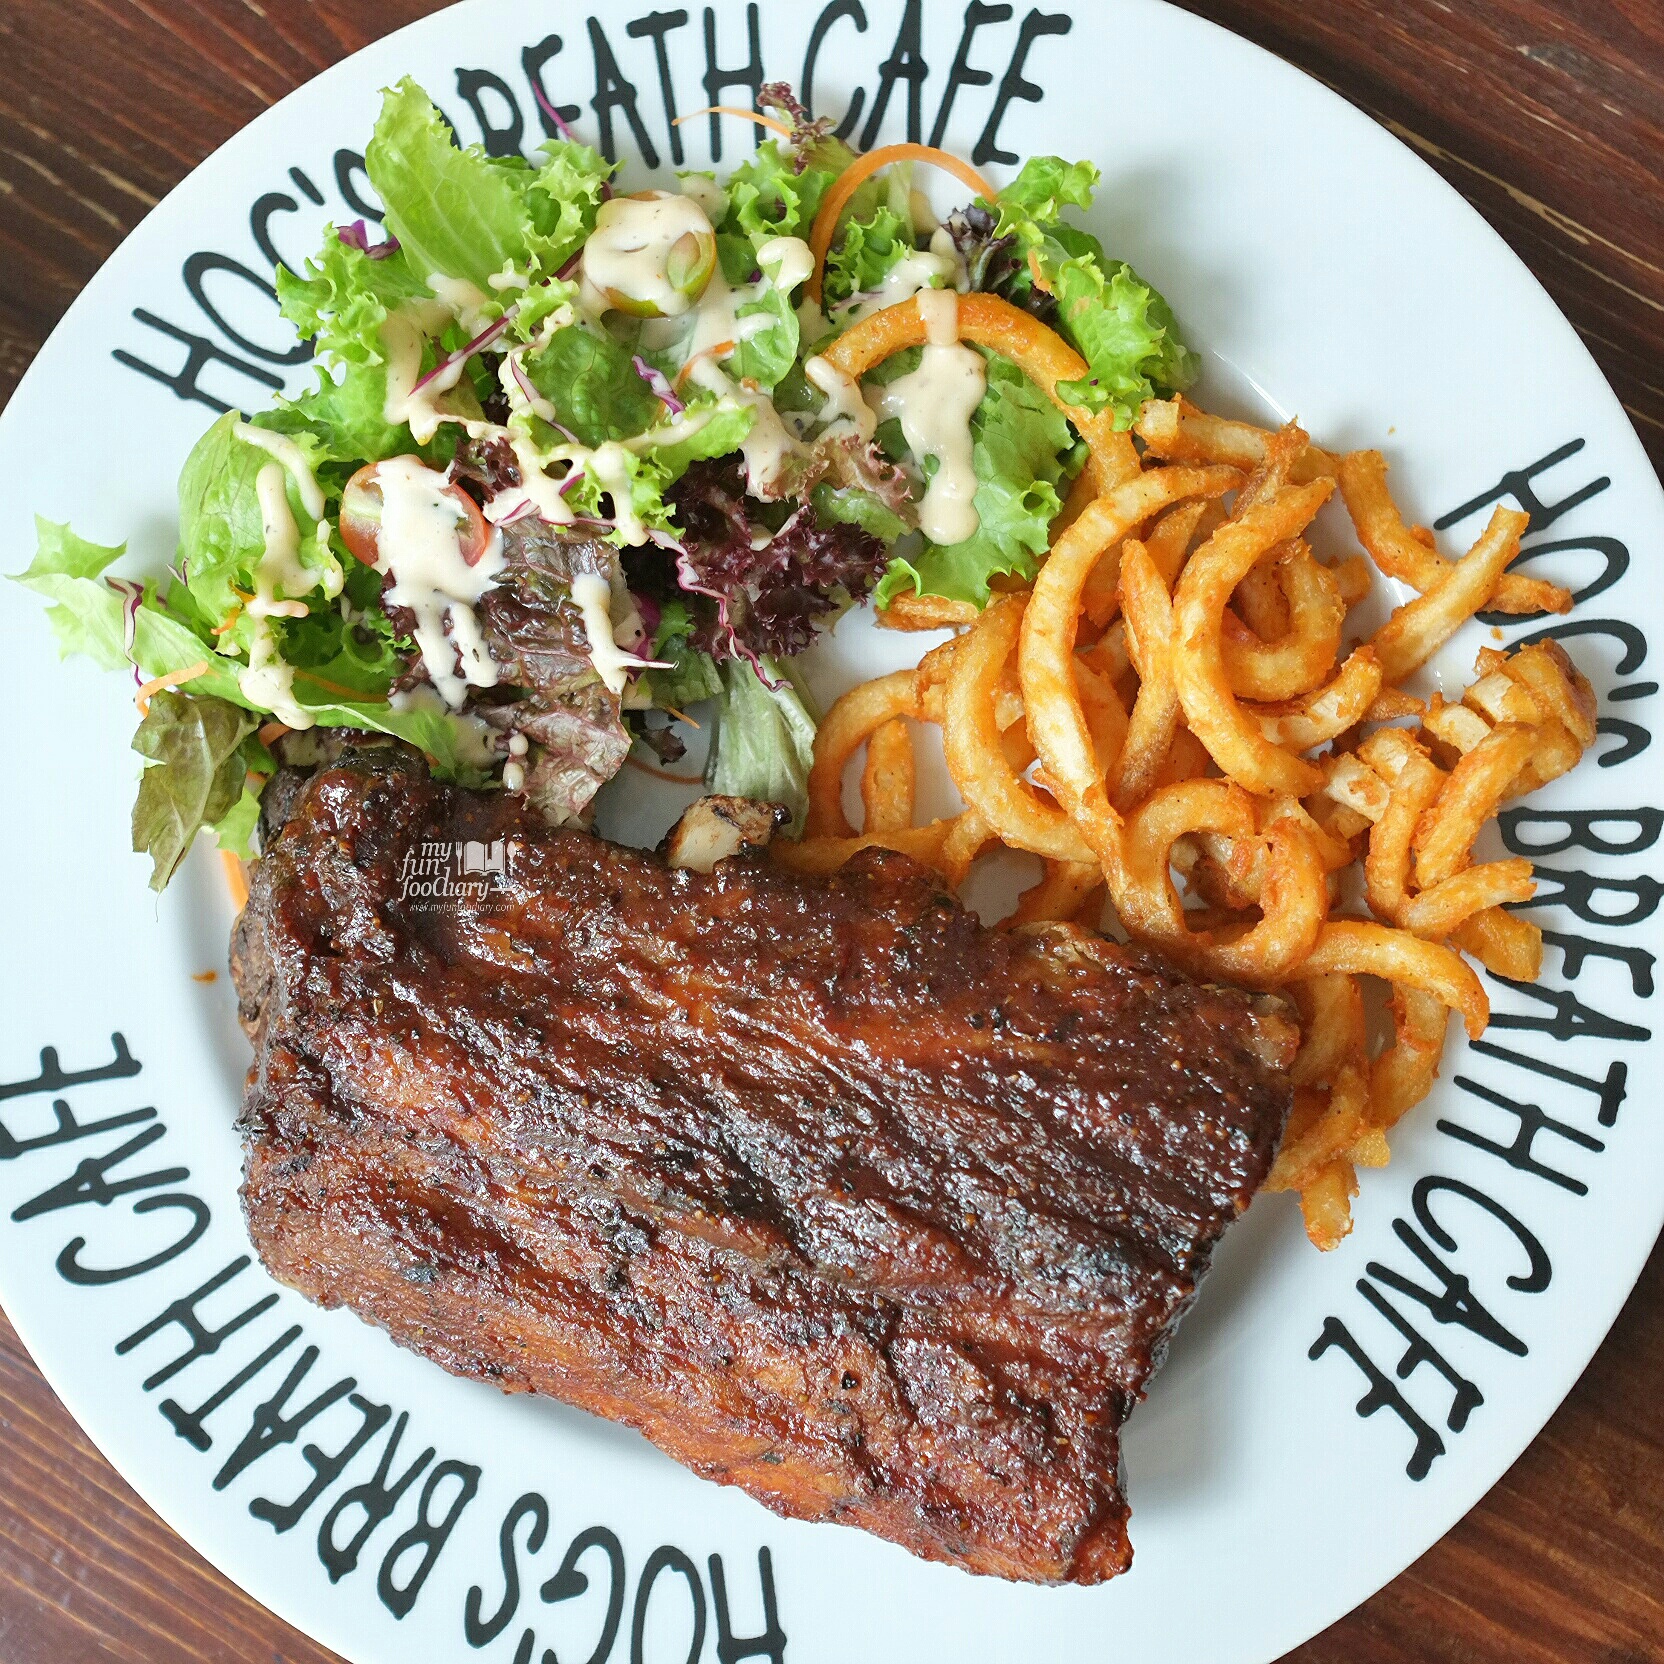 Smoked Pork BBQ Ribs at Hogs Breath Cafe by Myfunfoodiary 01